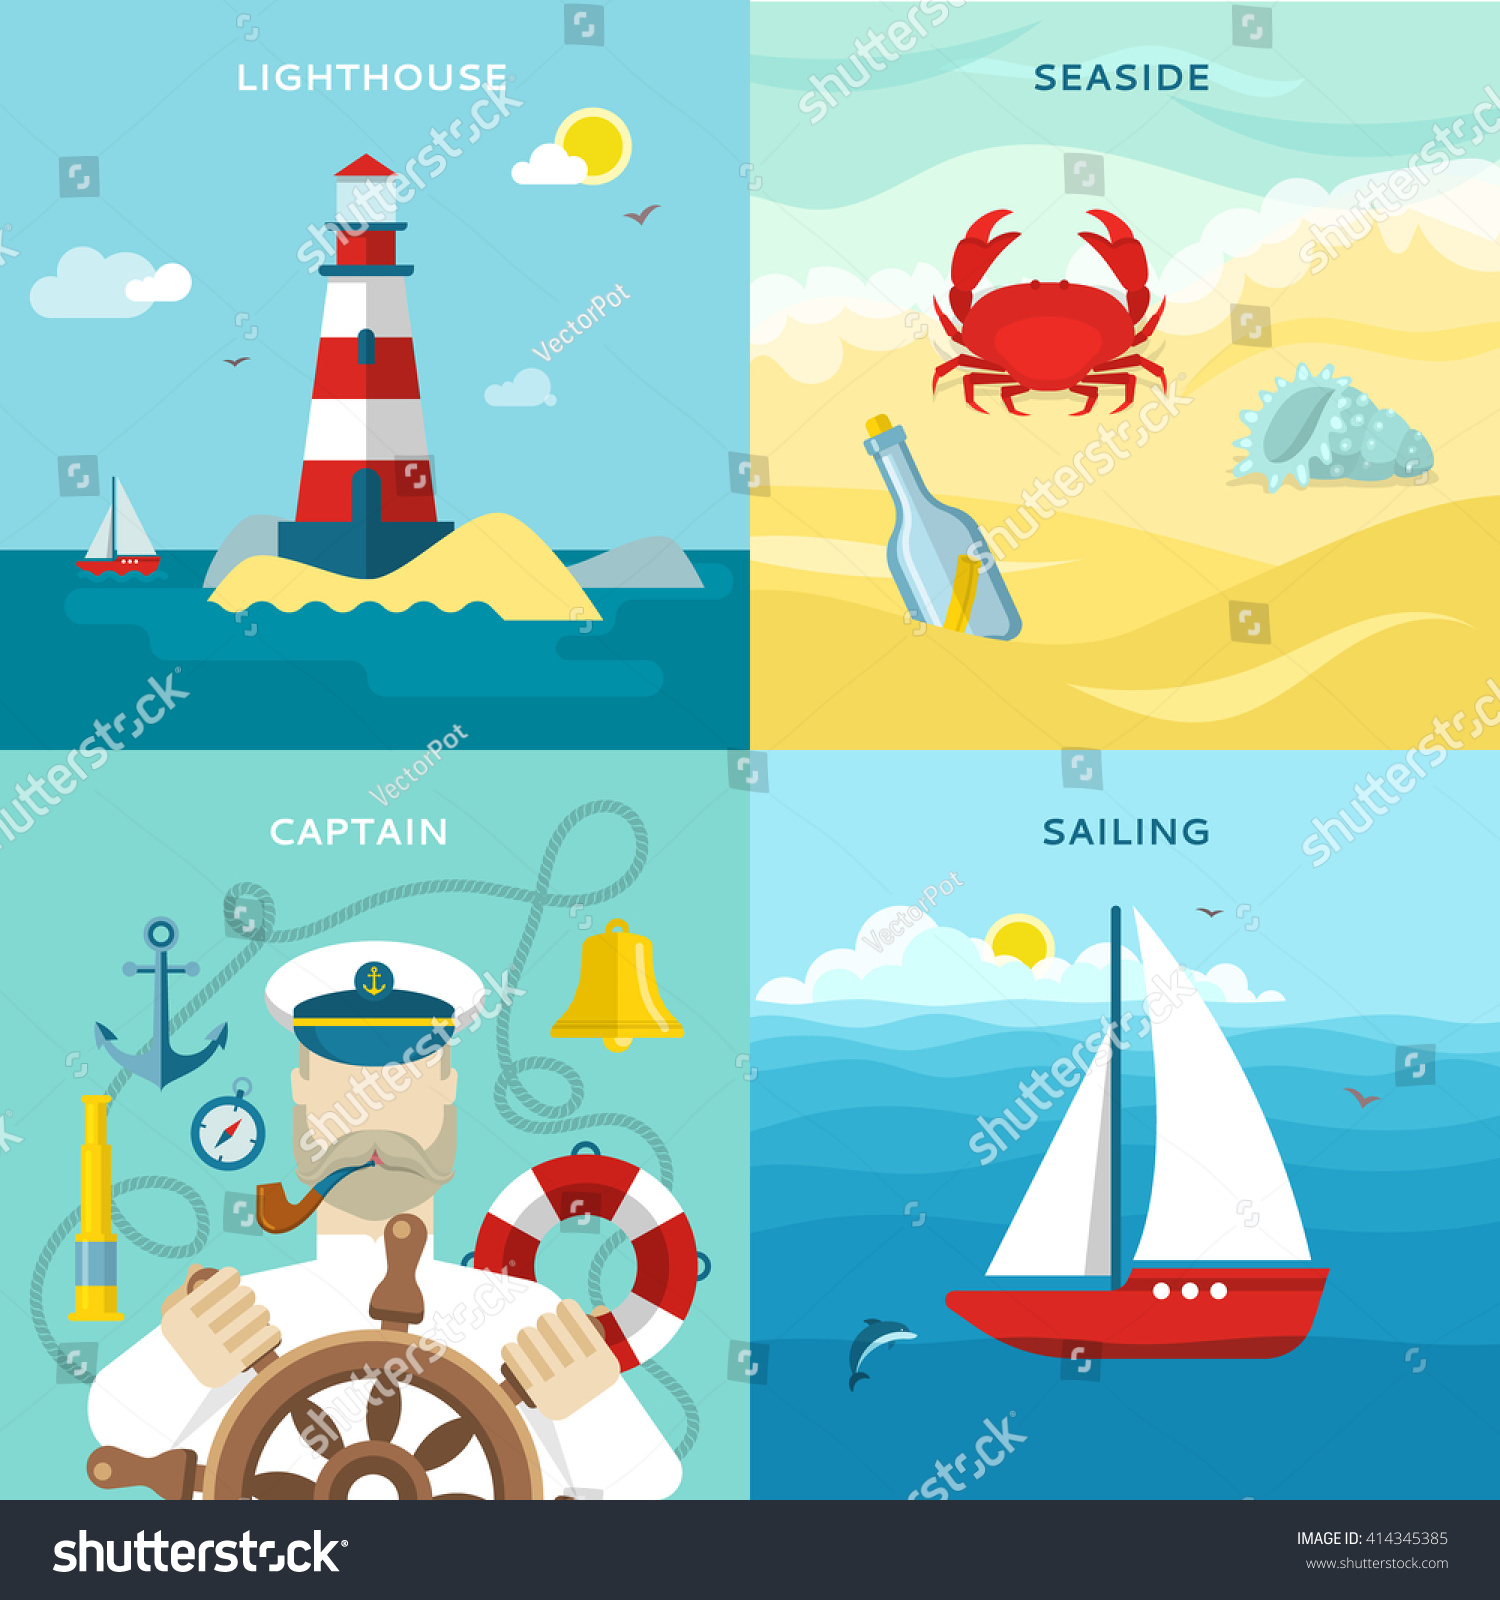 SVG of Four square nautical colored icon set with description of lighthouse seaside captain on the wheel and sailing in the ocean vector illustration svg